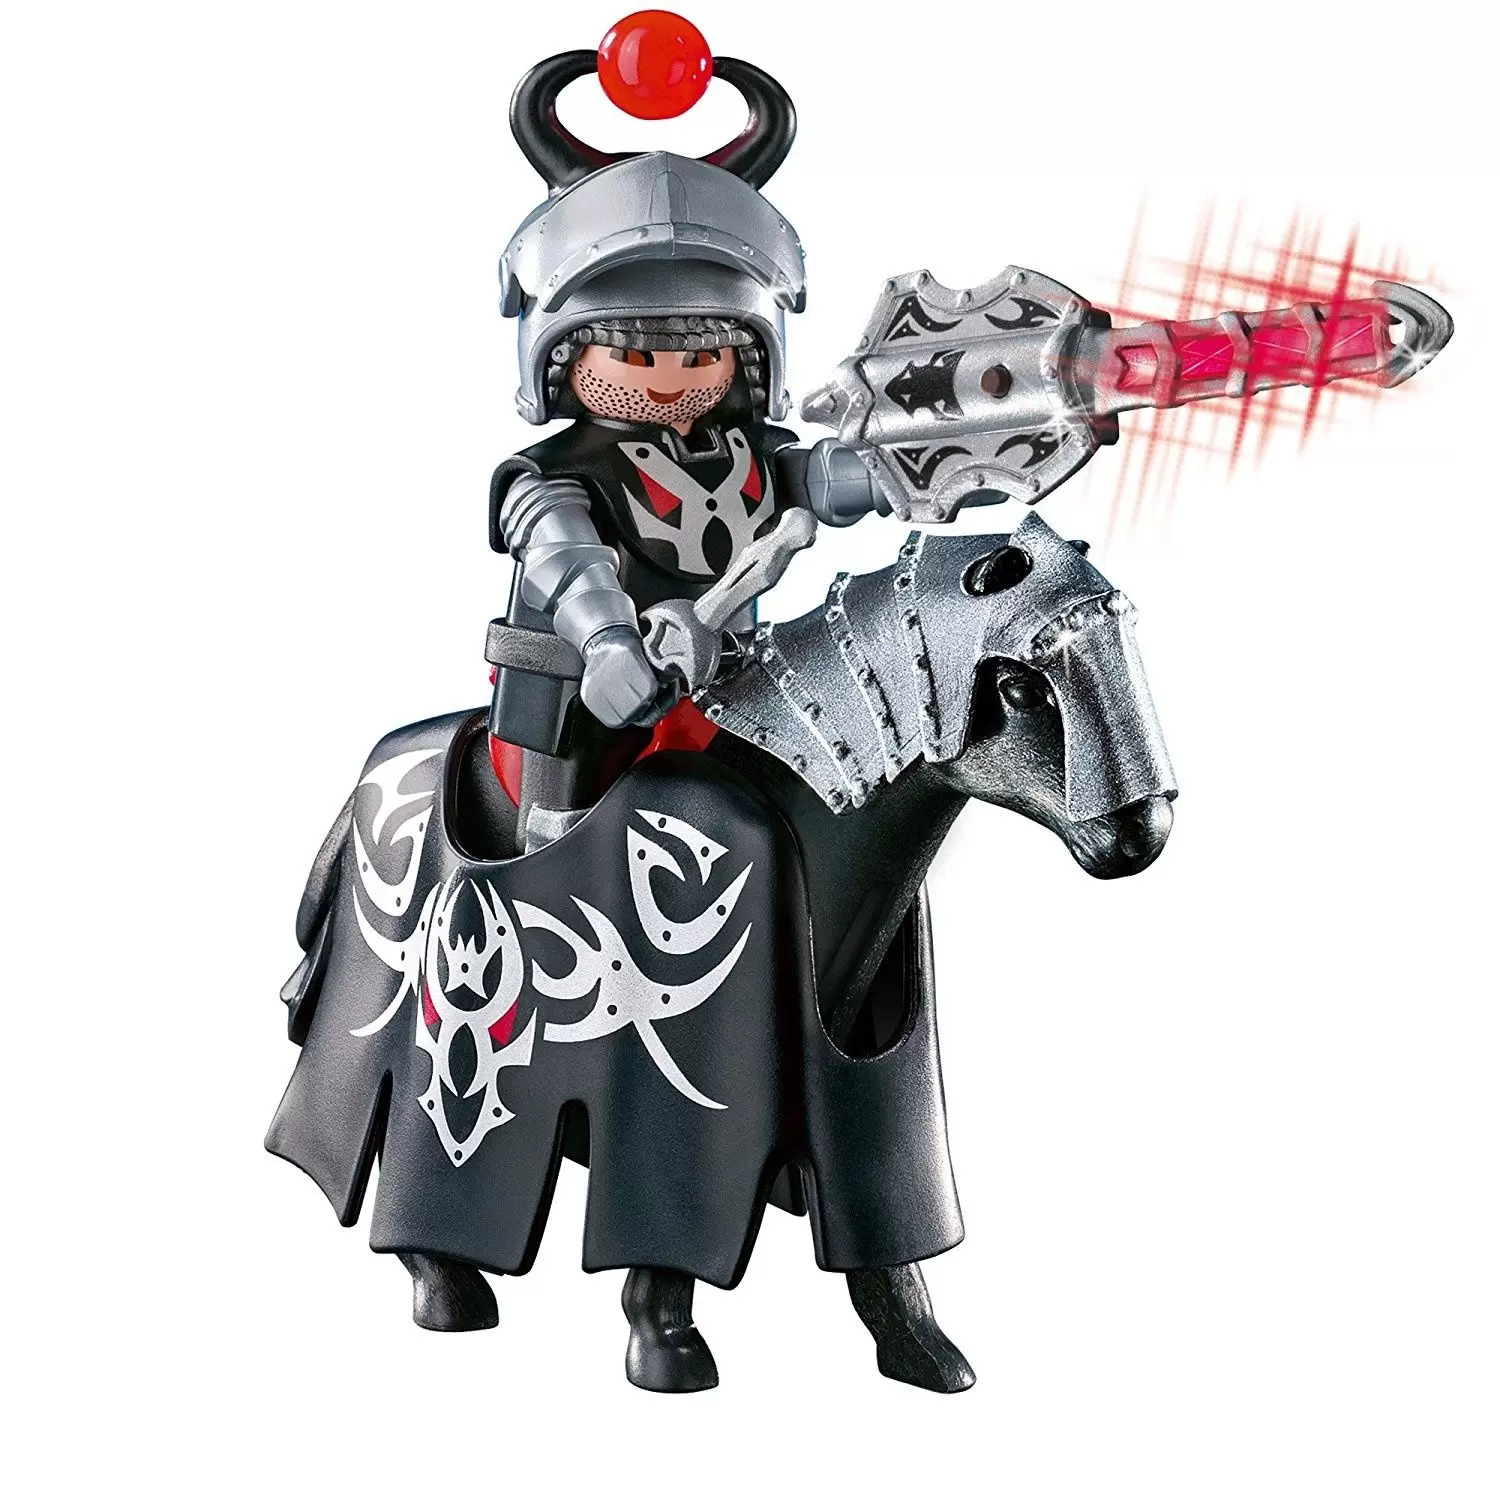 Playmobil Middle-Ages - Dragon Knight with LED-Lance